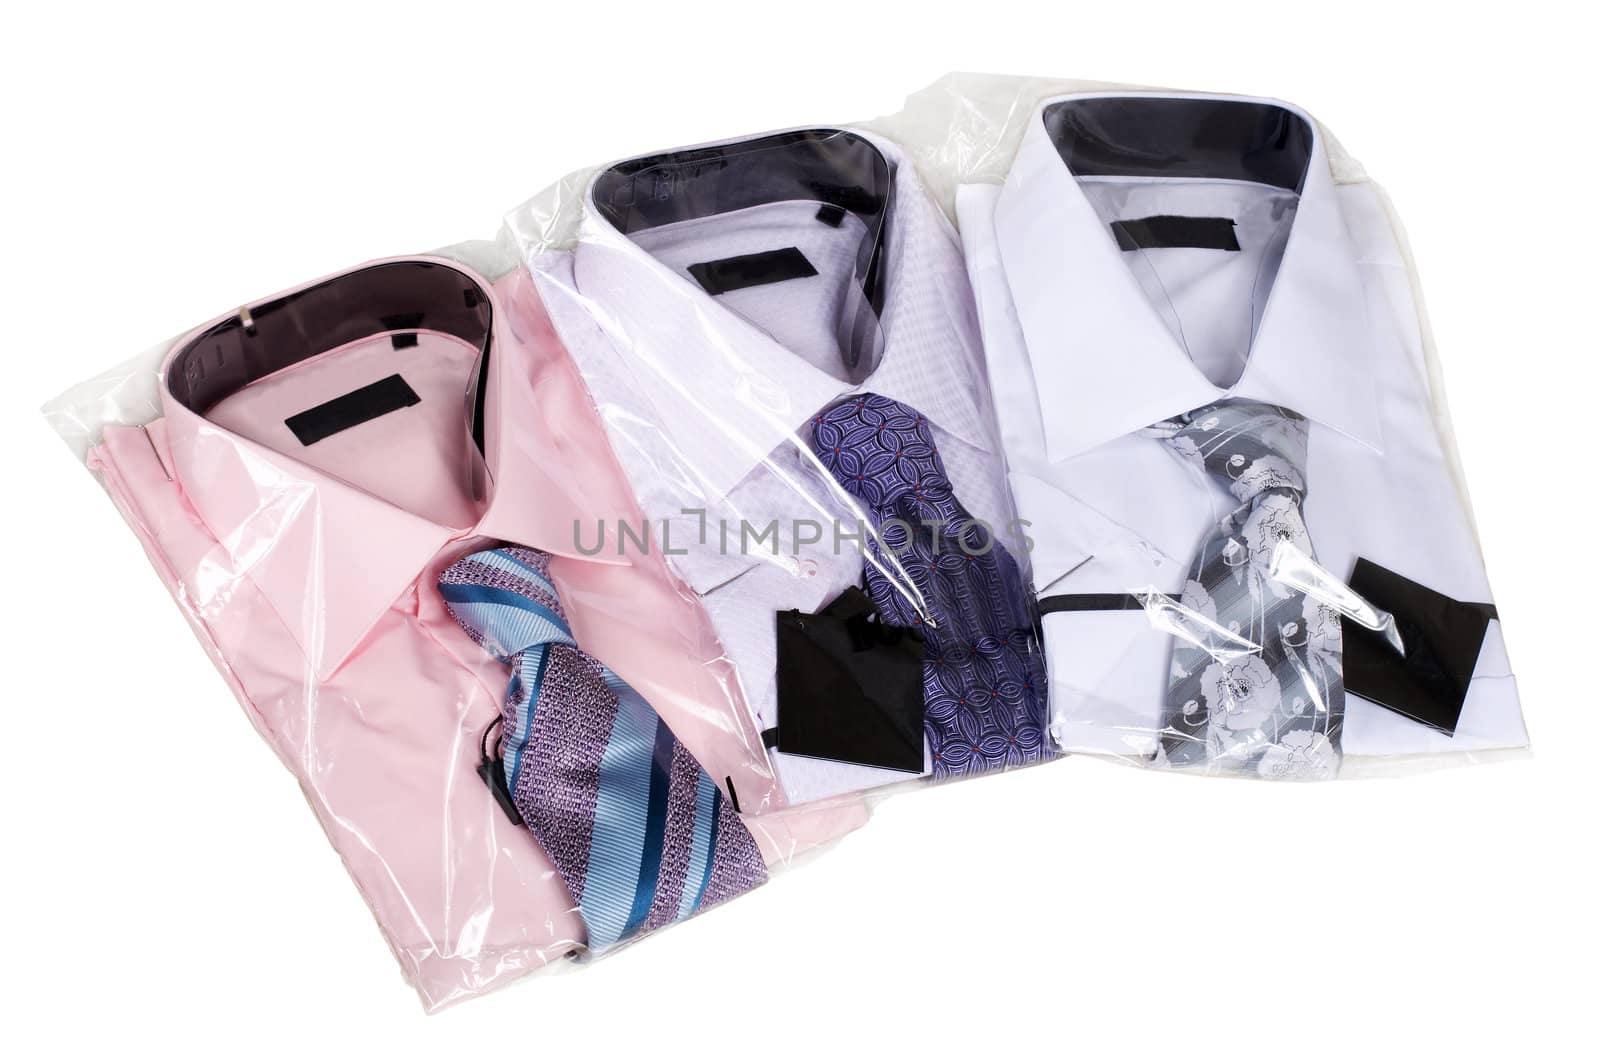 Three man's shirts with ties on a white background